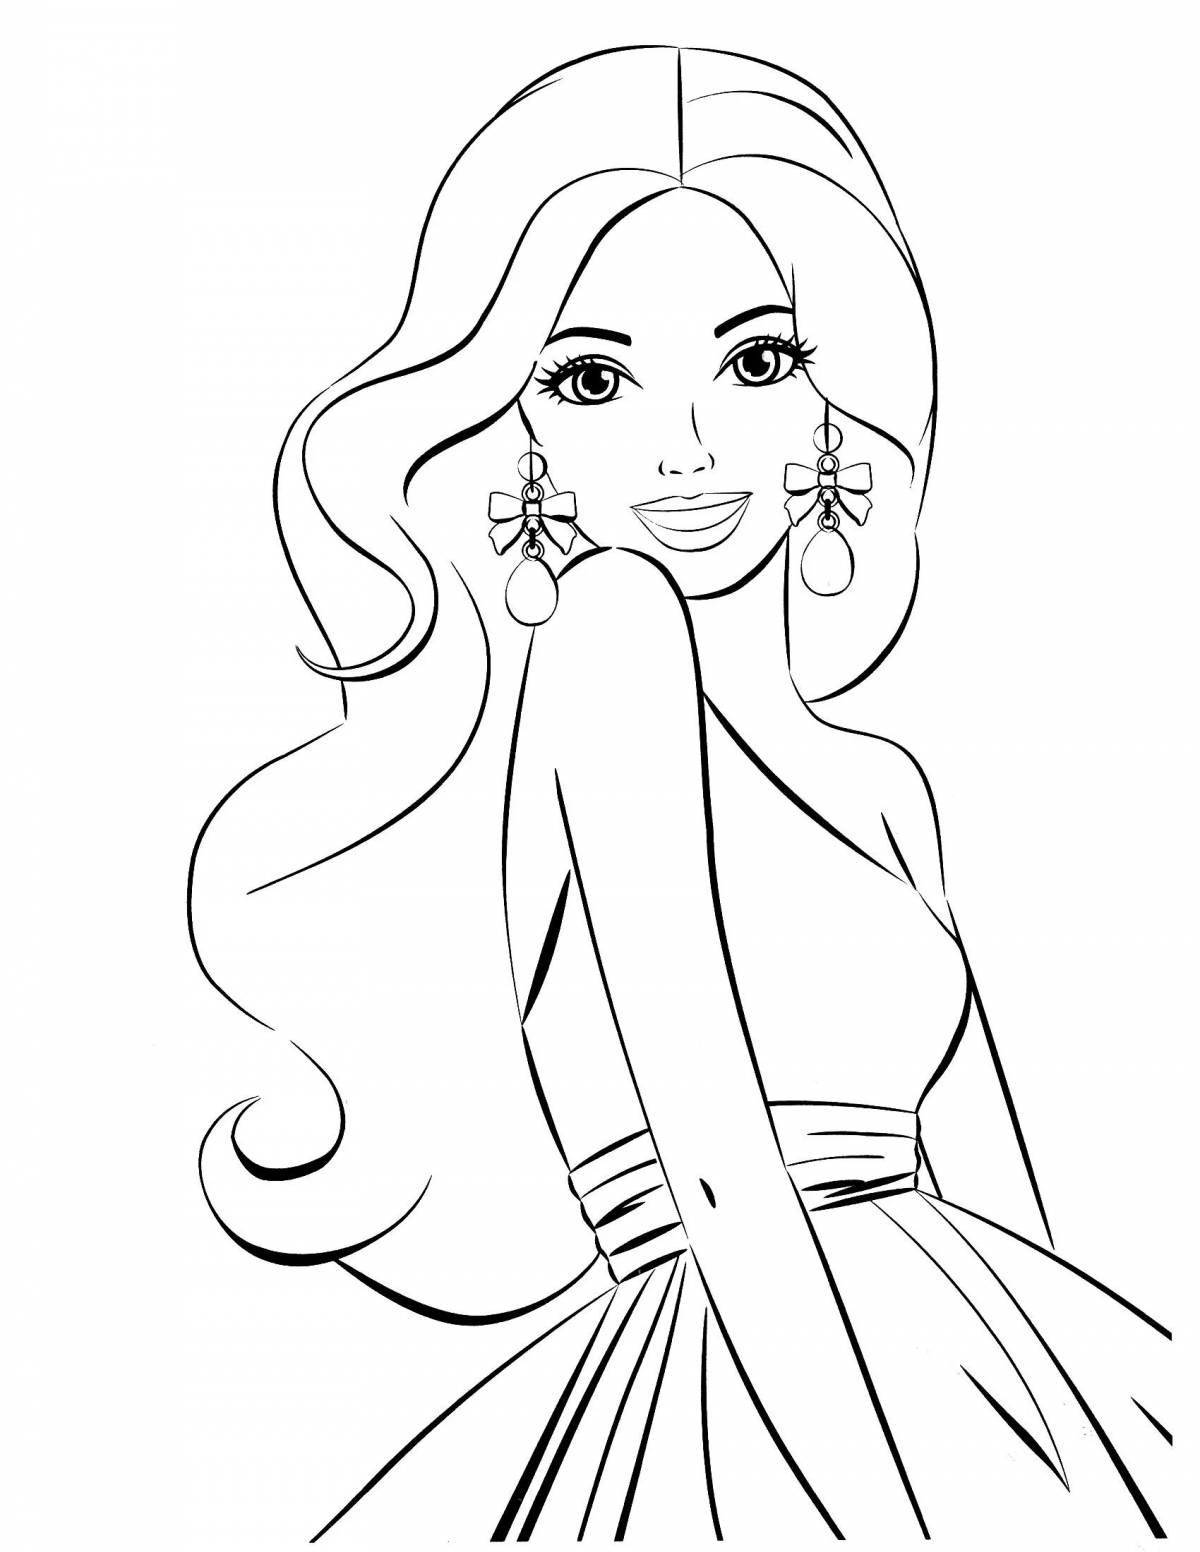 Fabulous coloring pages of barbie doll